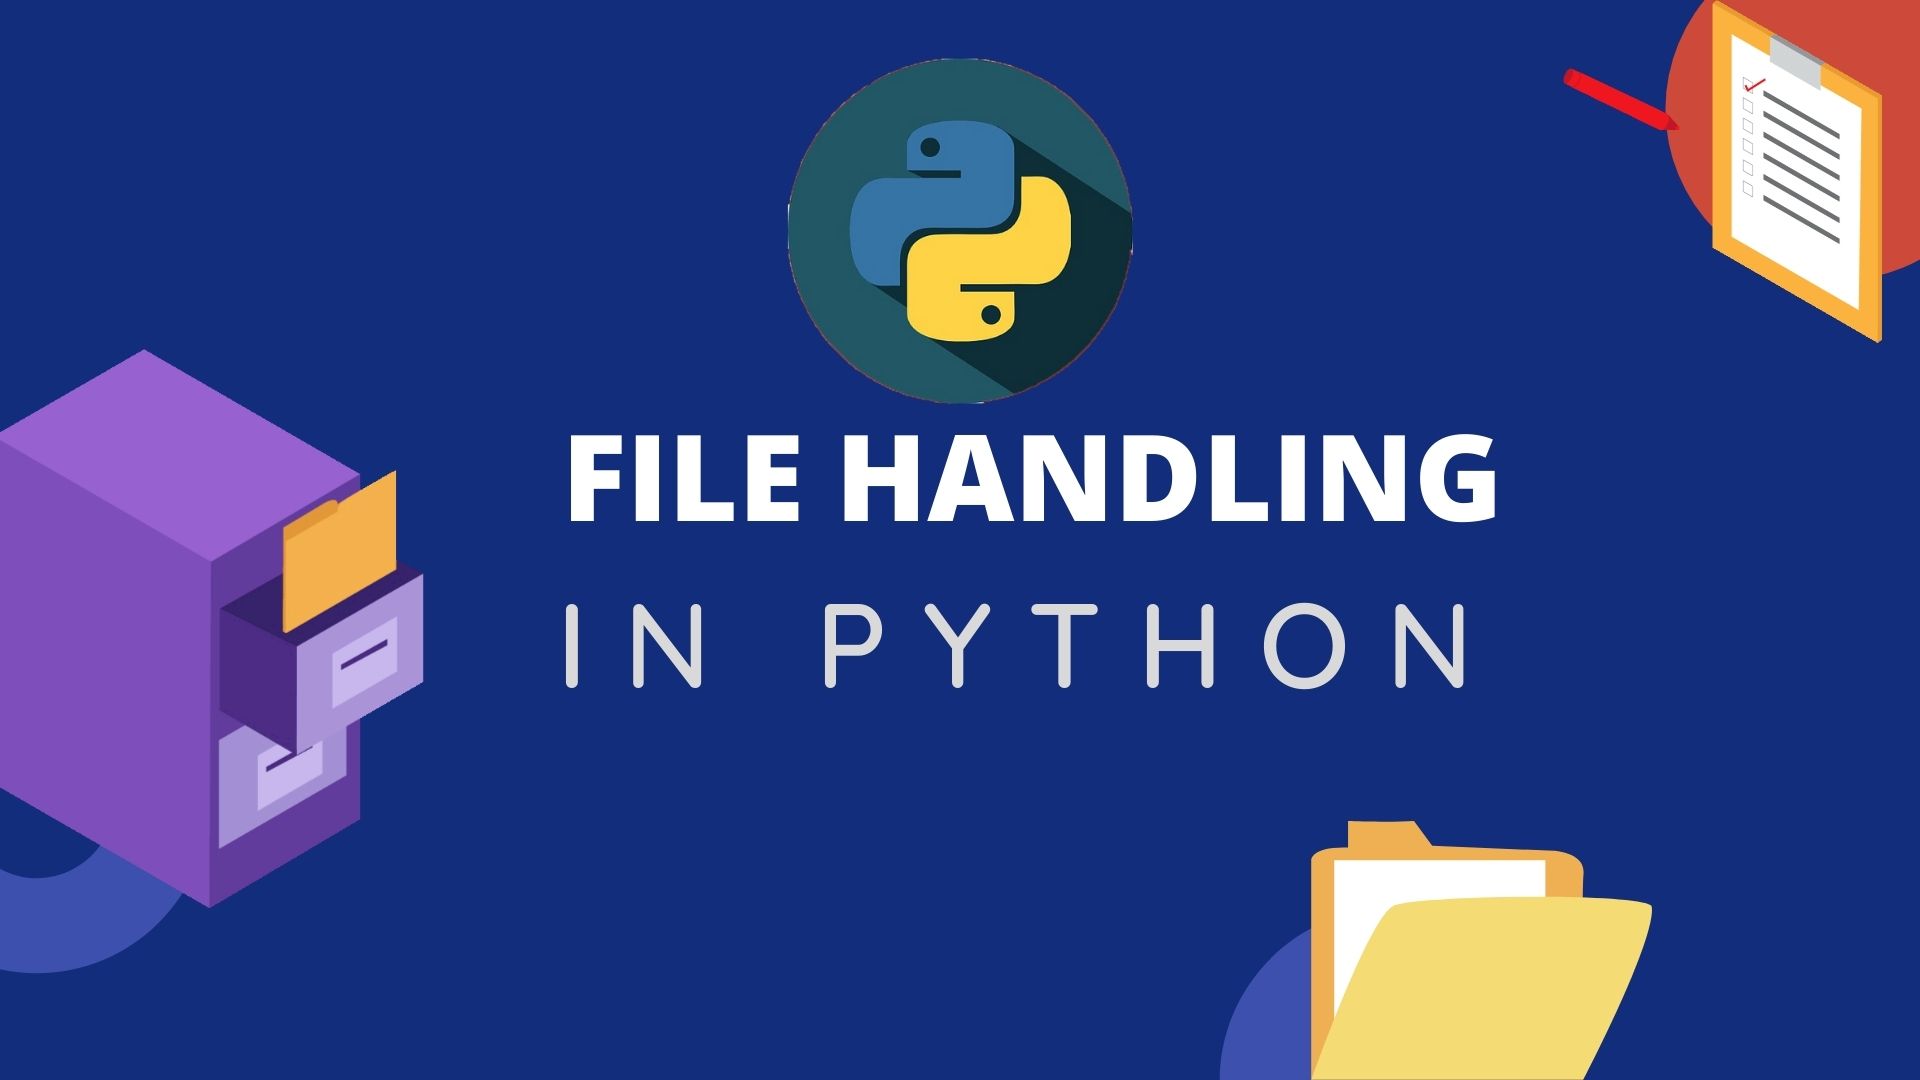 Python file handling: How to write and read files in python